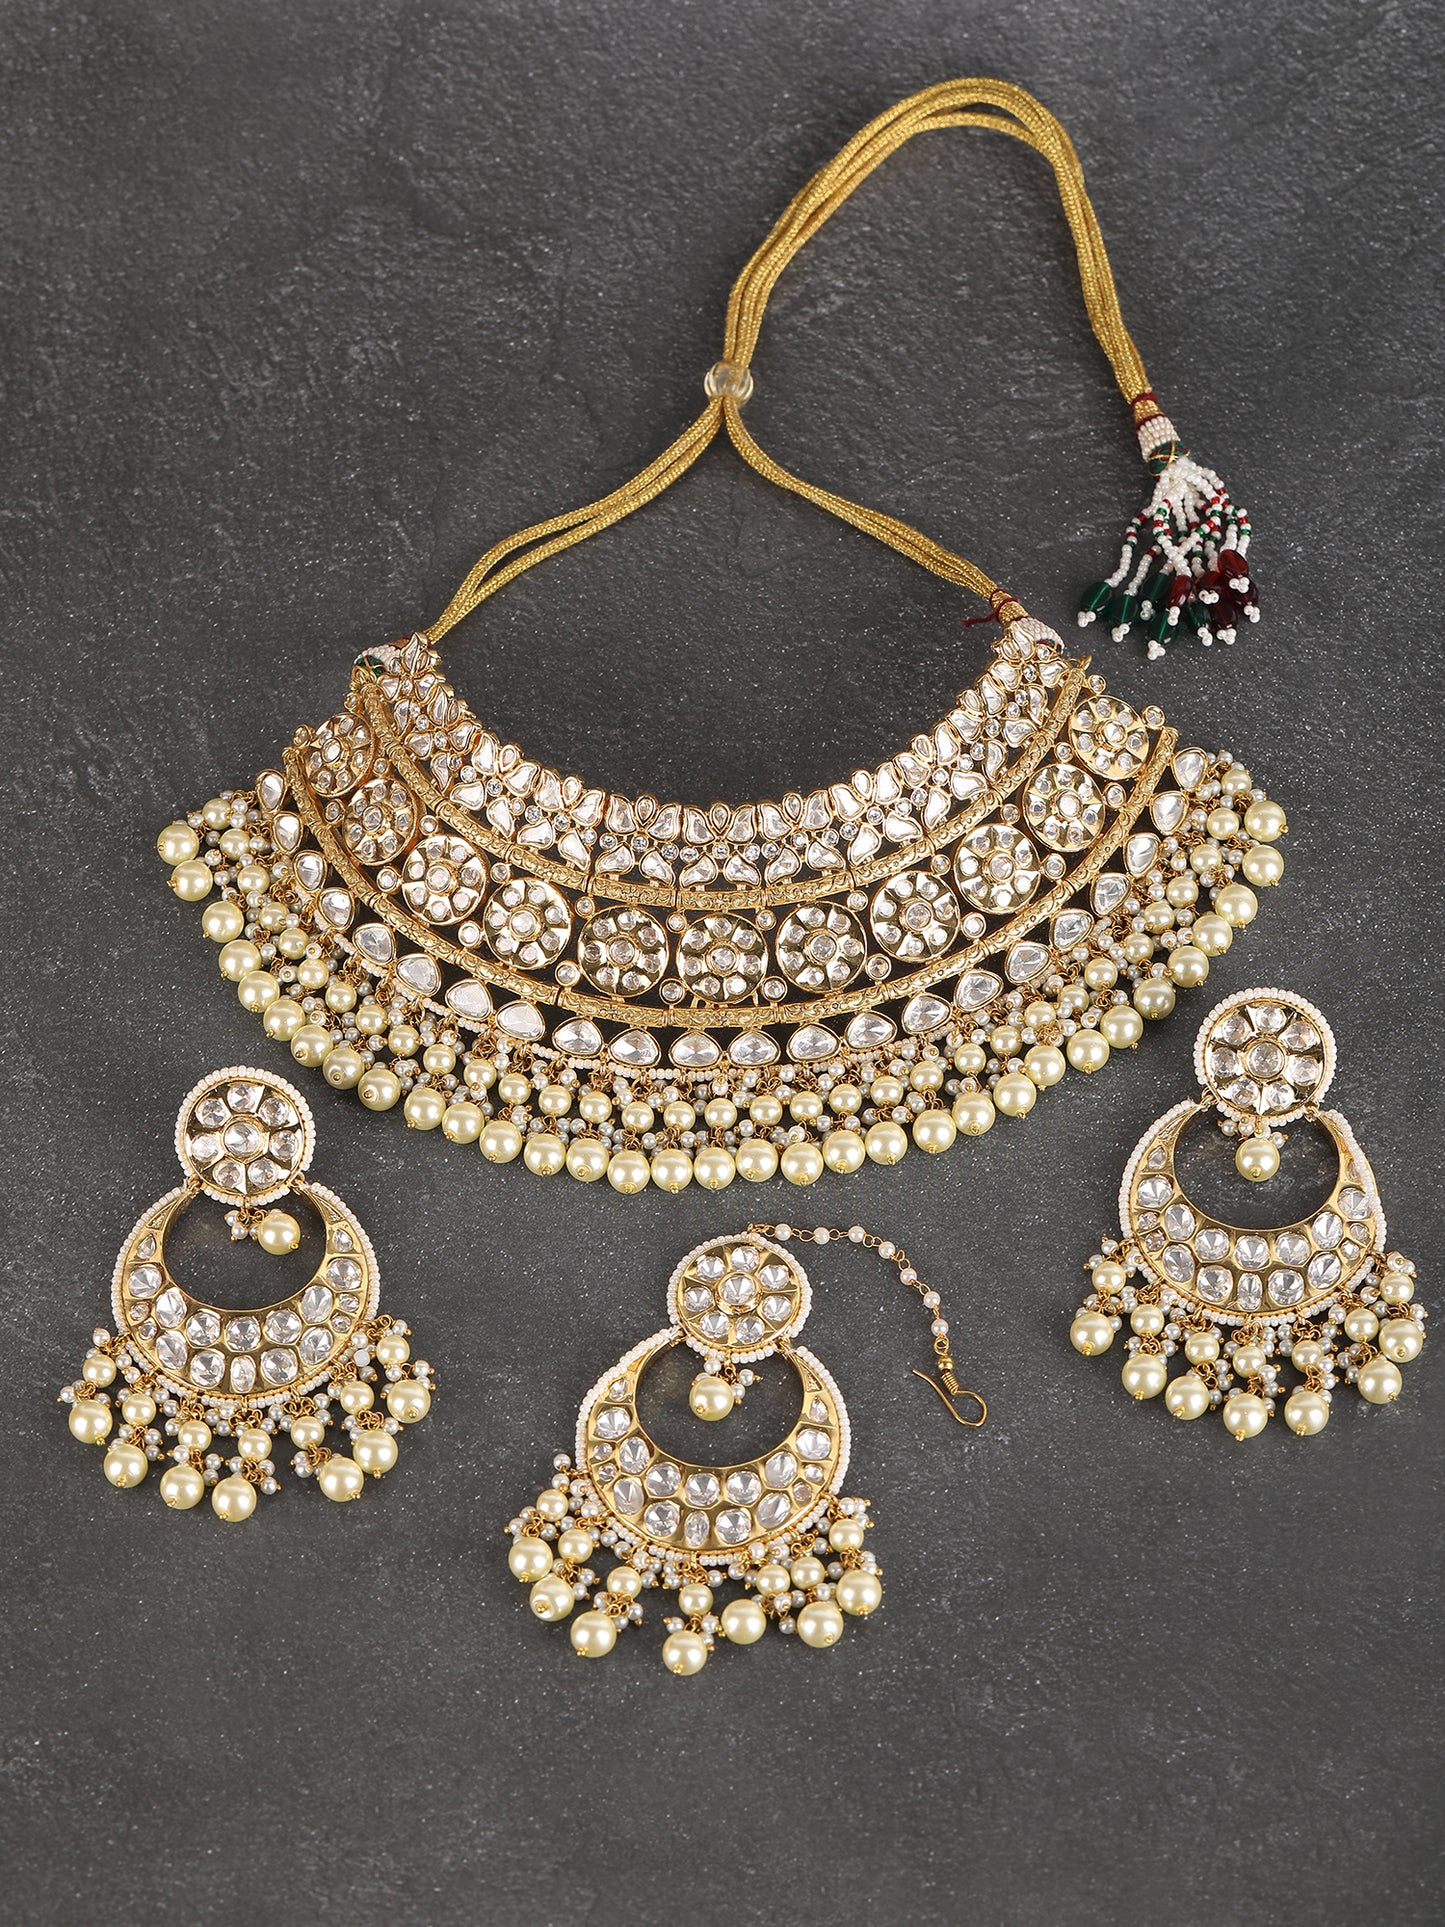 Bridal Necklace Set With Gold Jades & Pearls